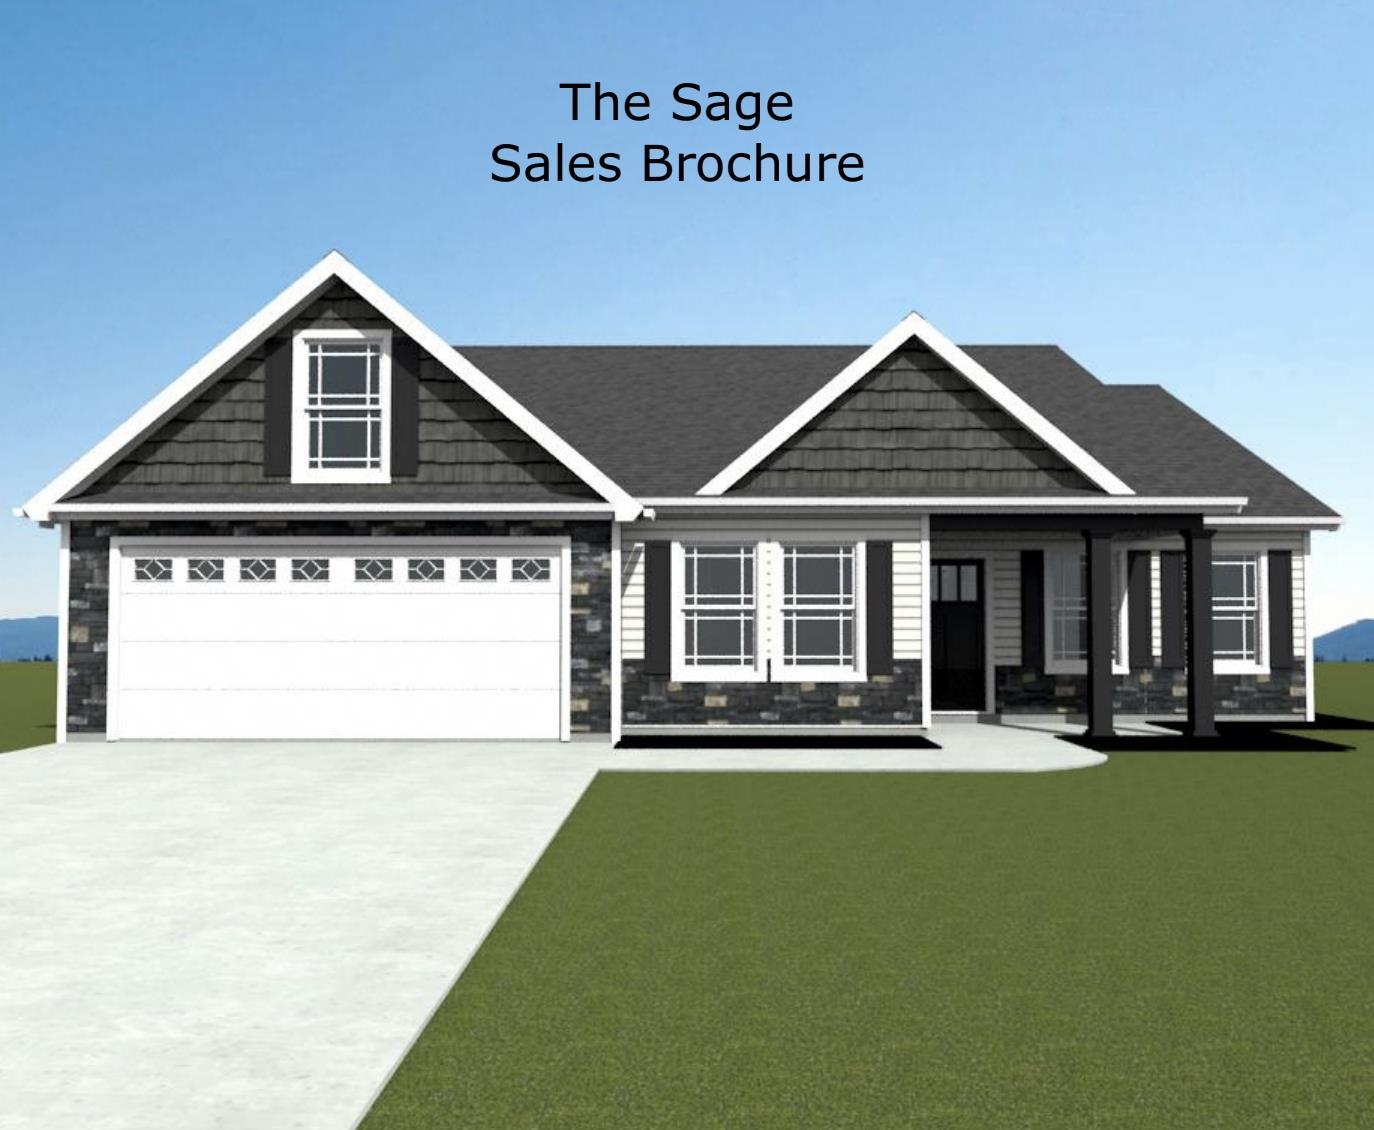 The Sage plan with sunroom & covered deck. 3 bedrooms & 2 baths. Large open living space. Other lots and homes available. Closing cost incentives available when working with preferred lender and attorney. Call for details! Lot 37.